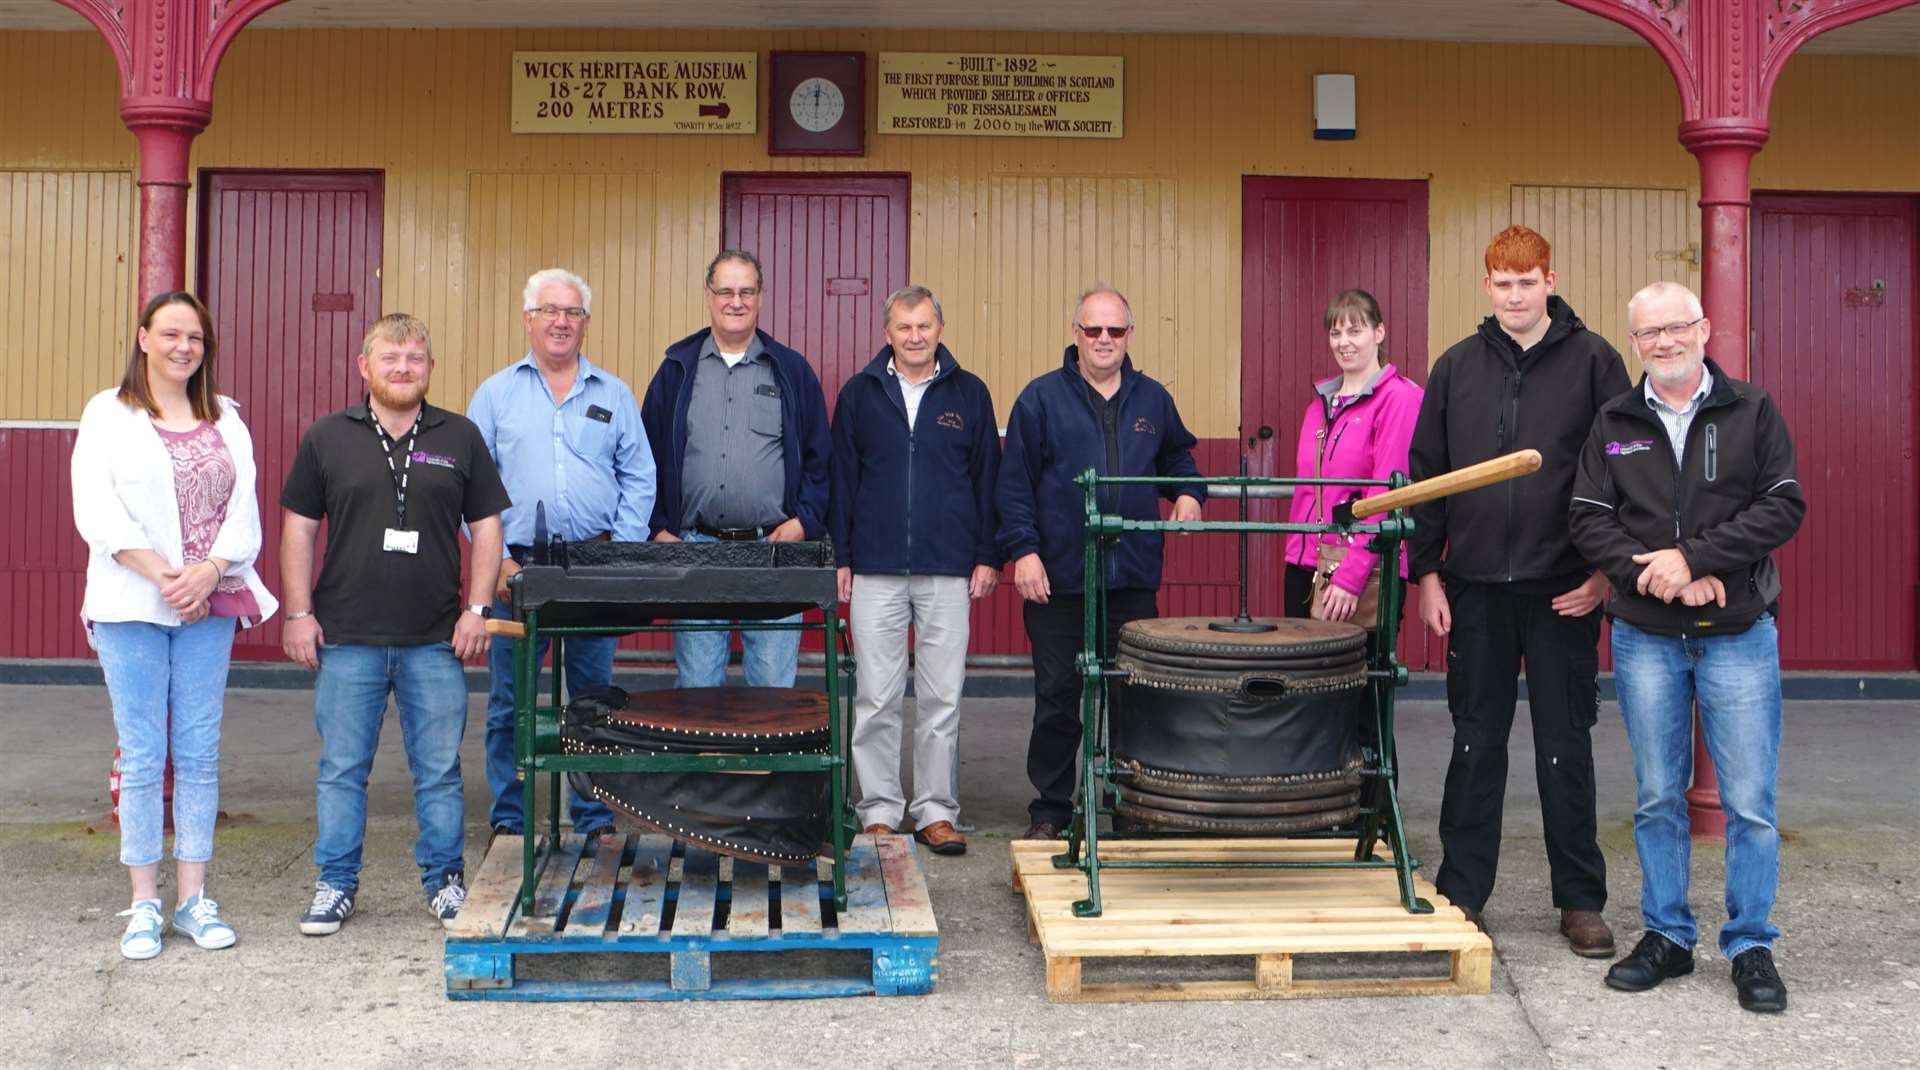 Members of the Wick Society together with some of the college team who restored the bellows.